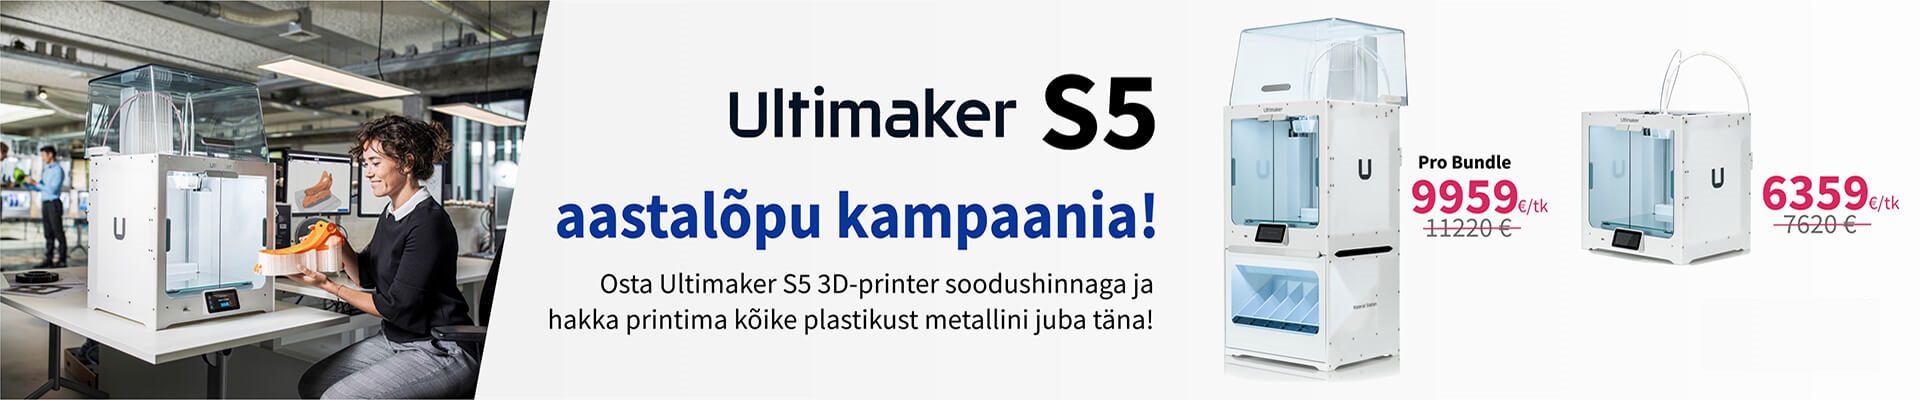 UltimakerS5